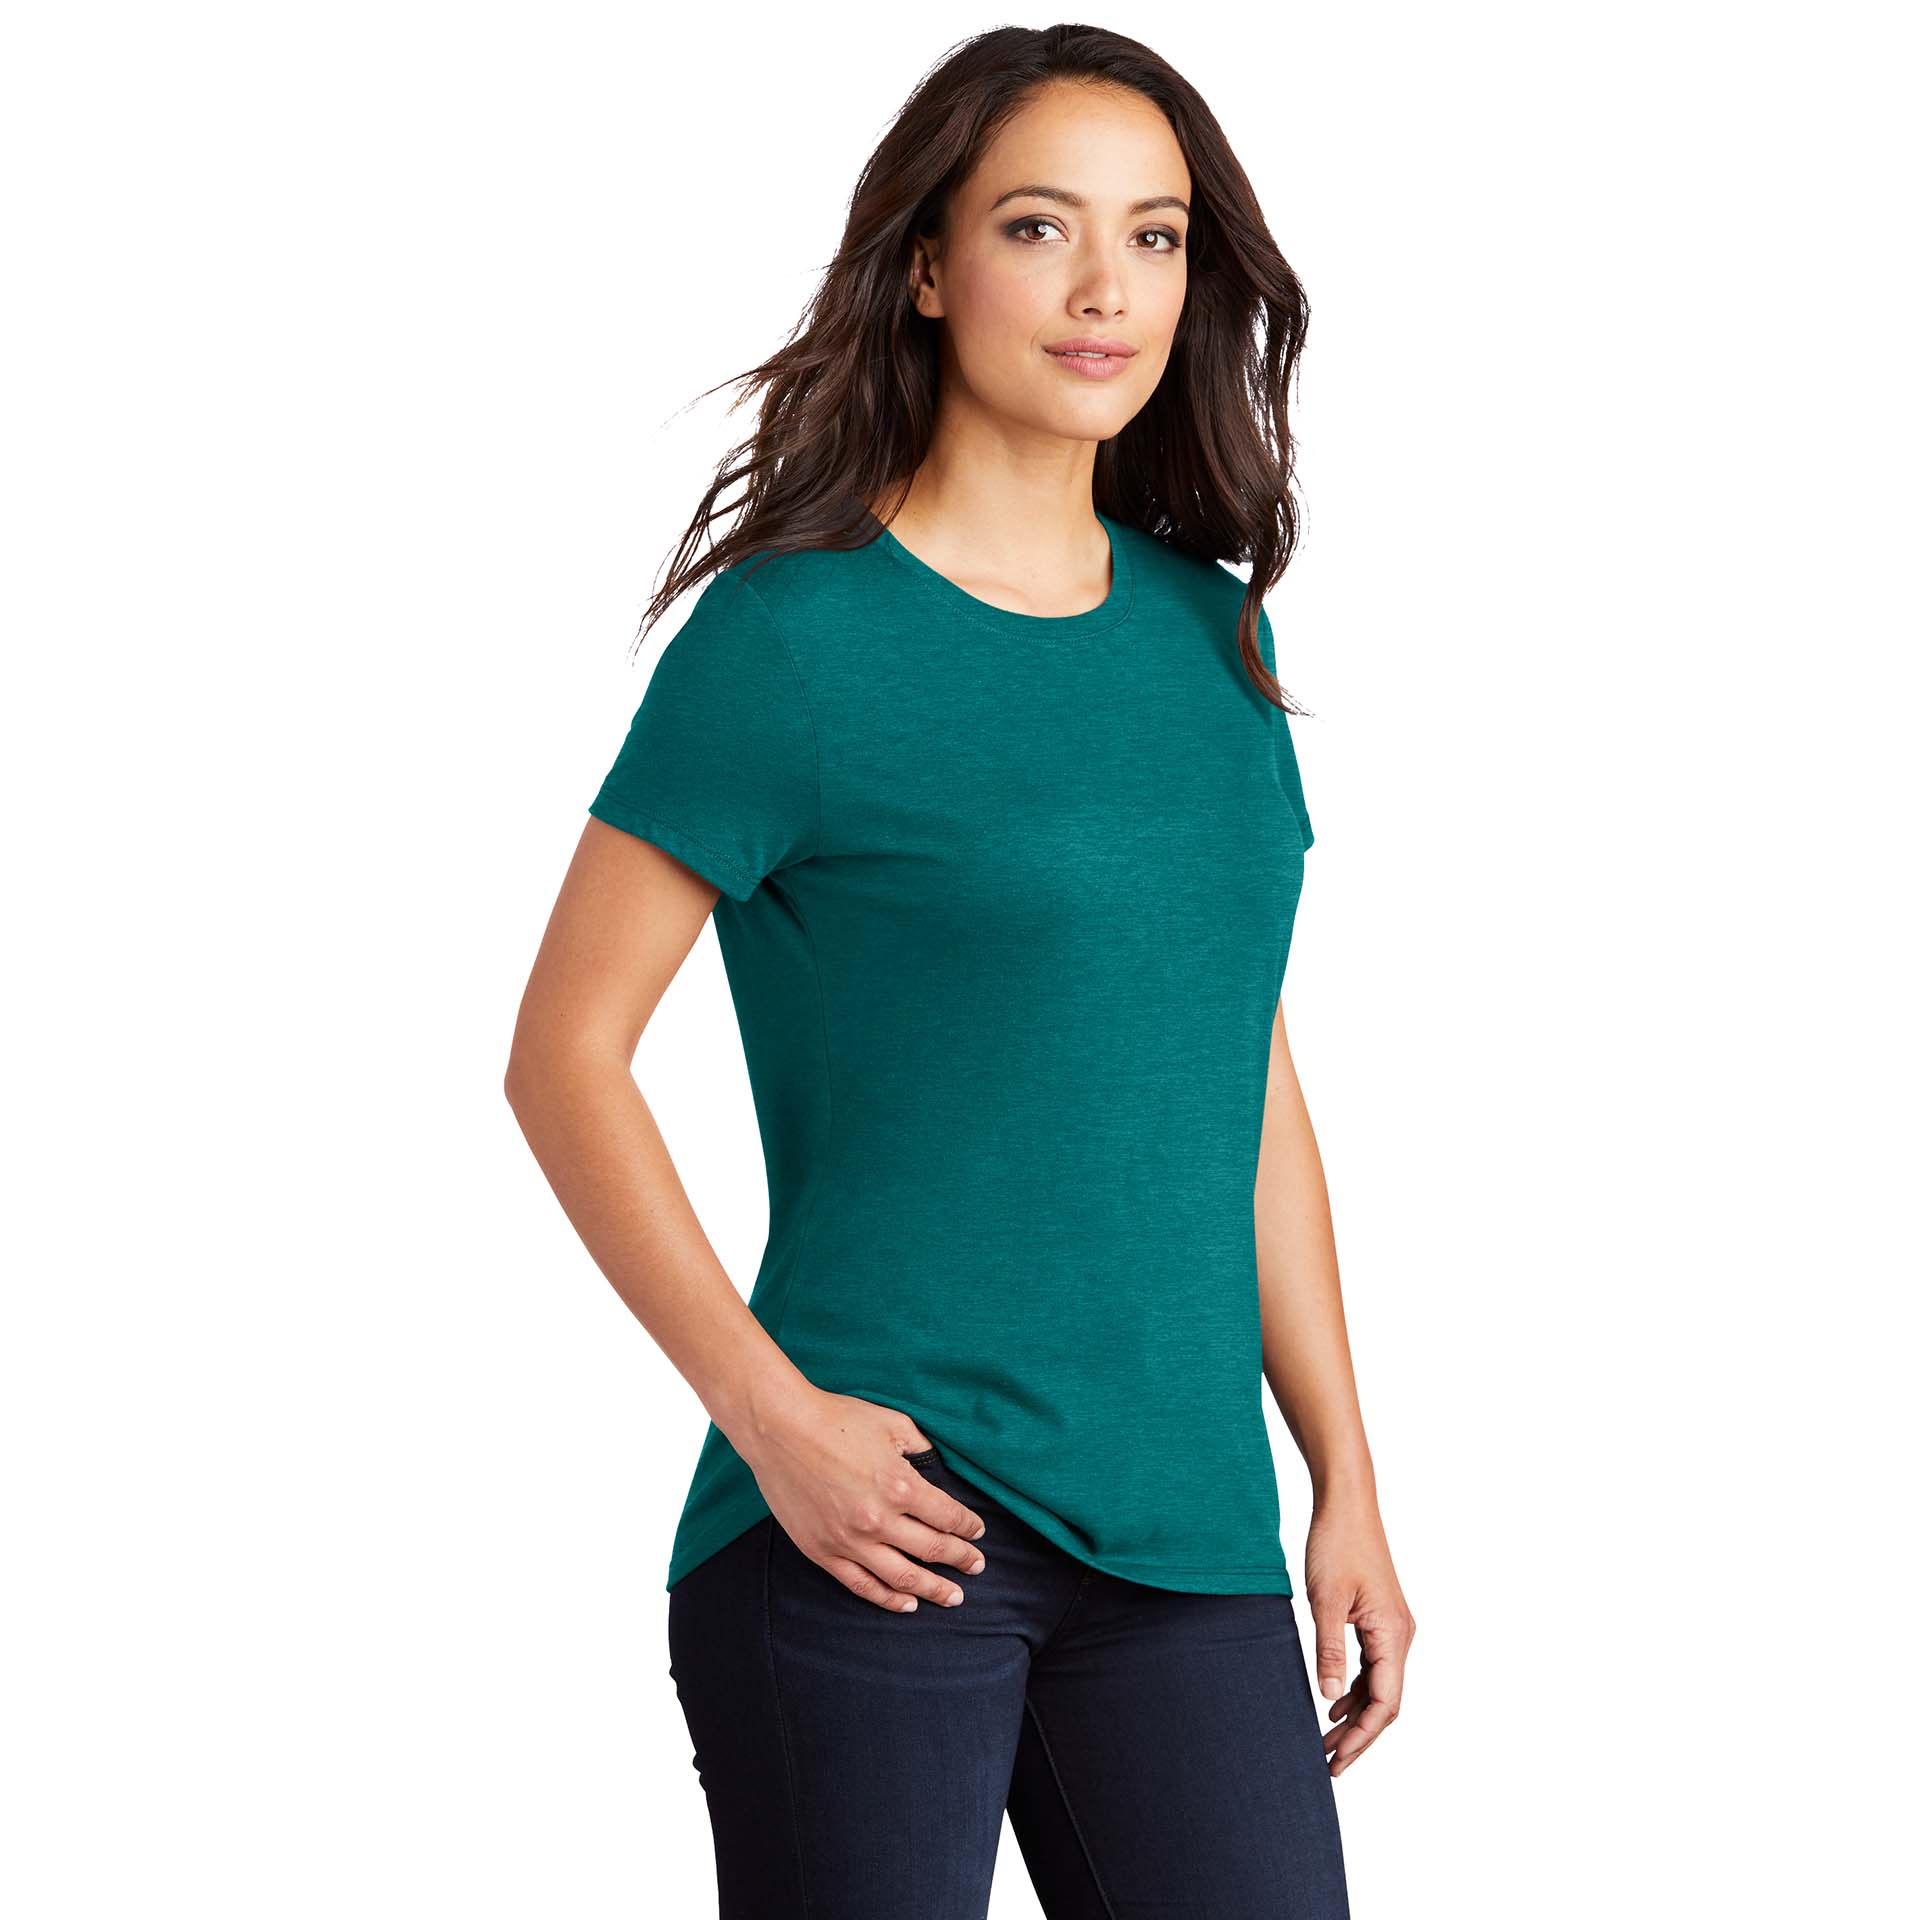 District DM130L Women's Perfect Tri Tee - Heathered Teal | Full Source